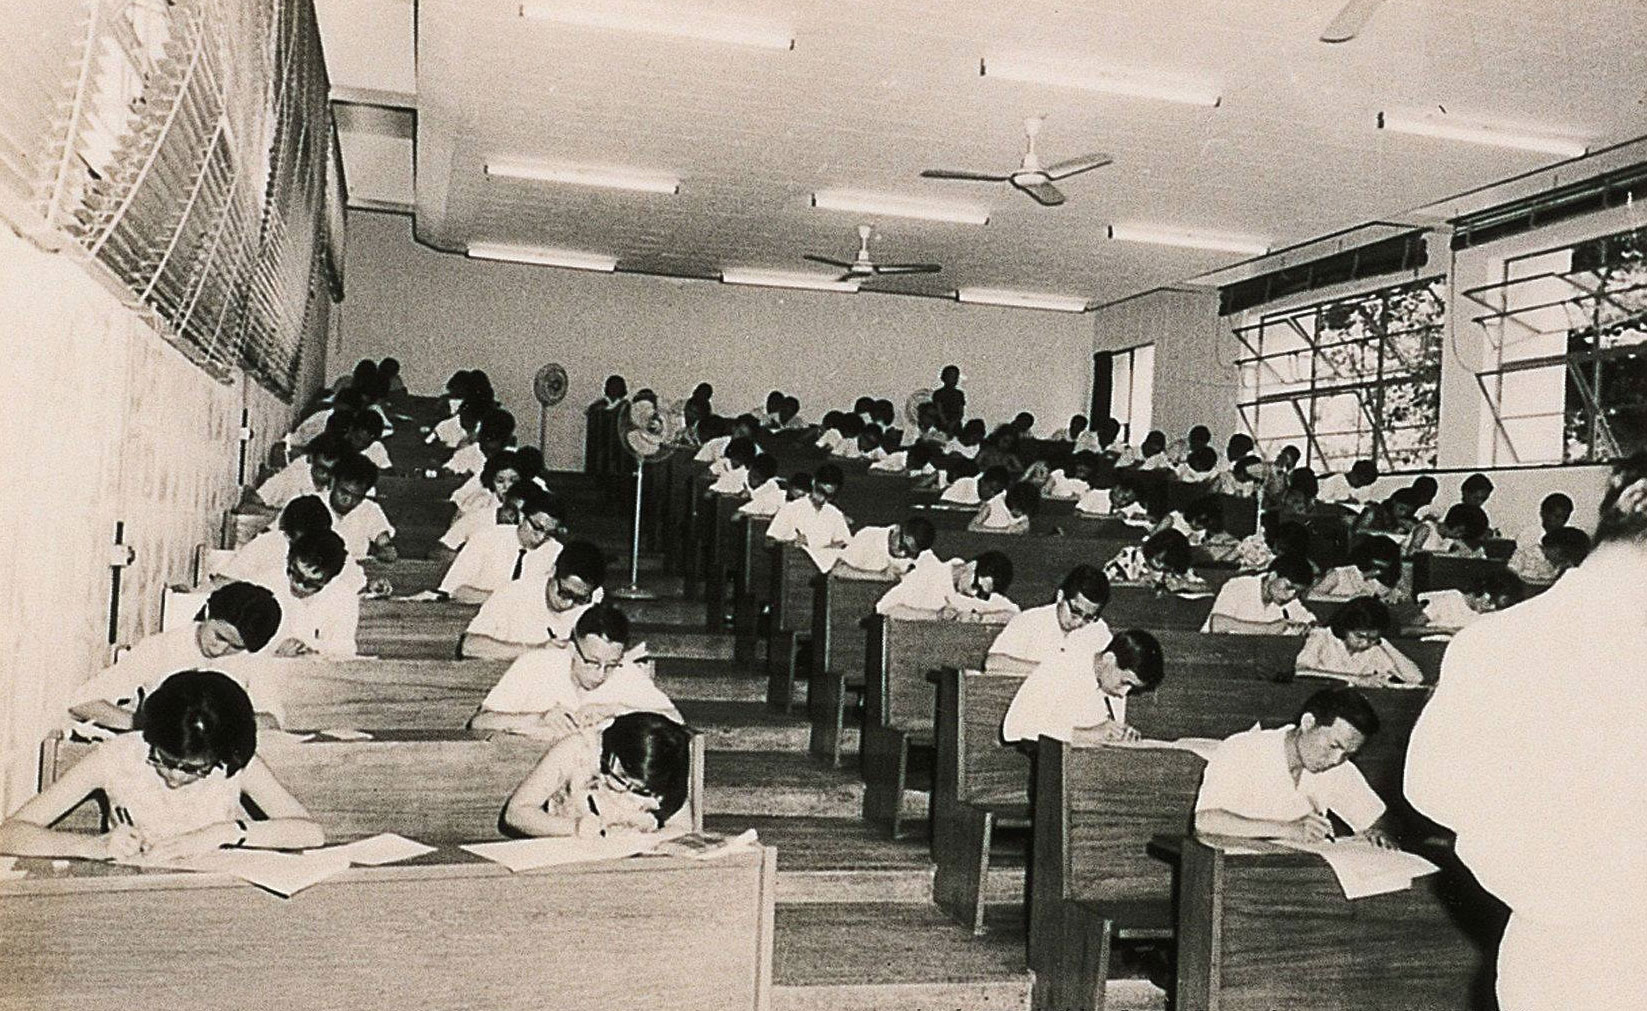 Examination in progress – a scene from the 1960s